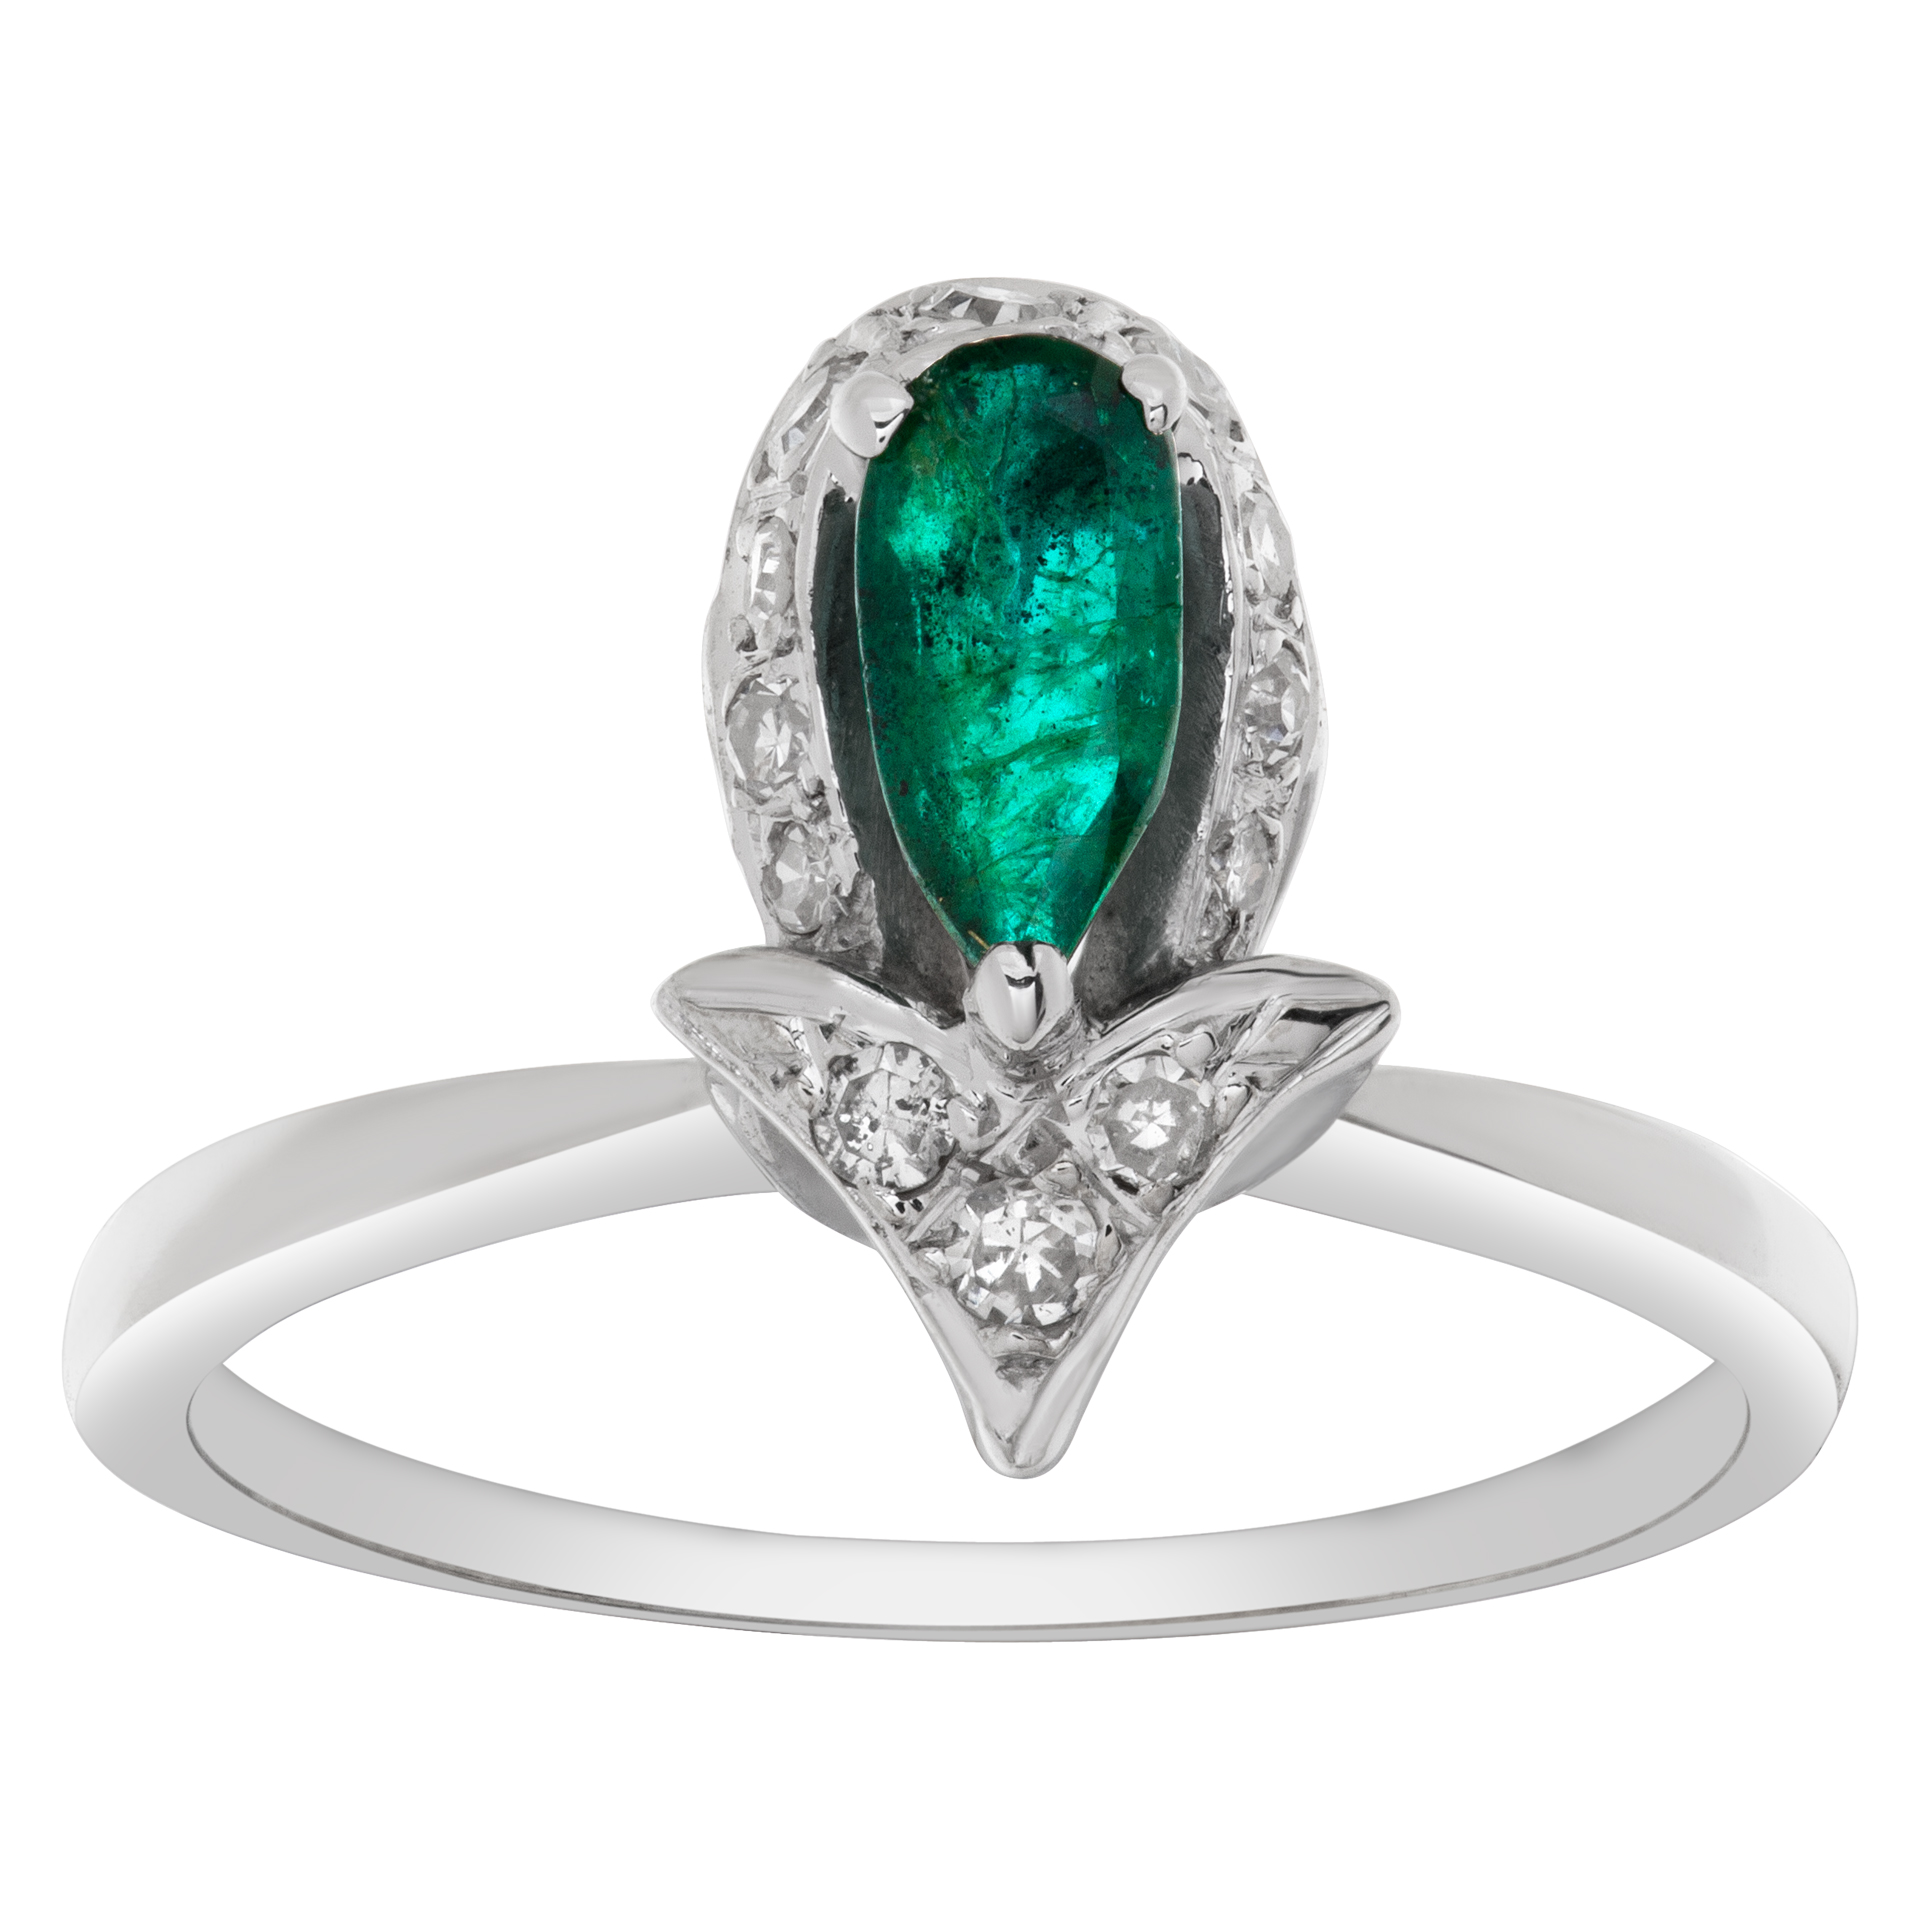 Tear drop Emerald ring with brilliant round cut accent diamonds set in 14k white gold